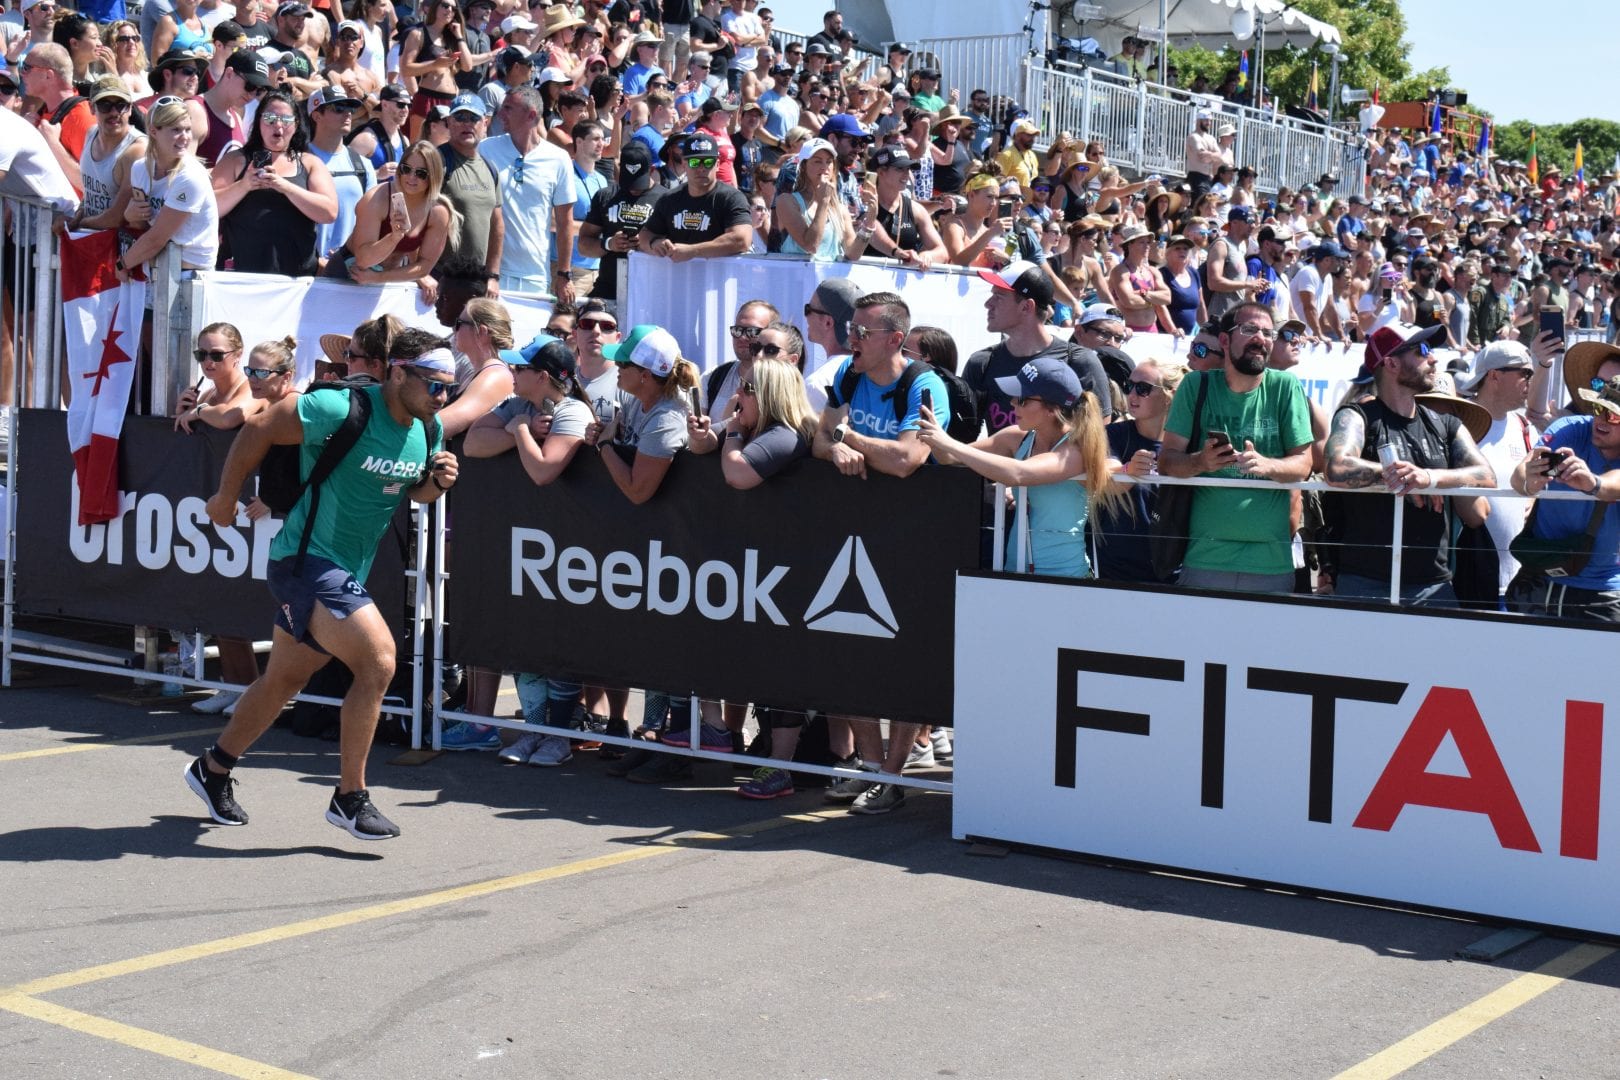 Will Moorad completes the Ruck Run event at the 2019 CrossFit Games